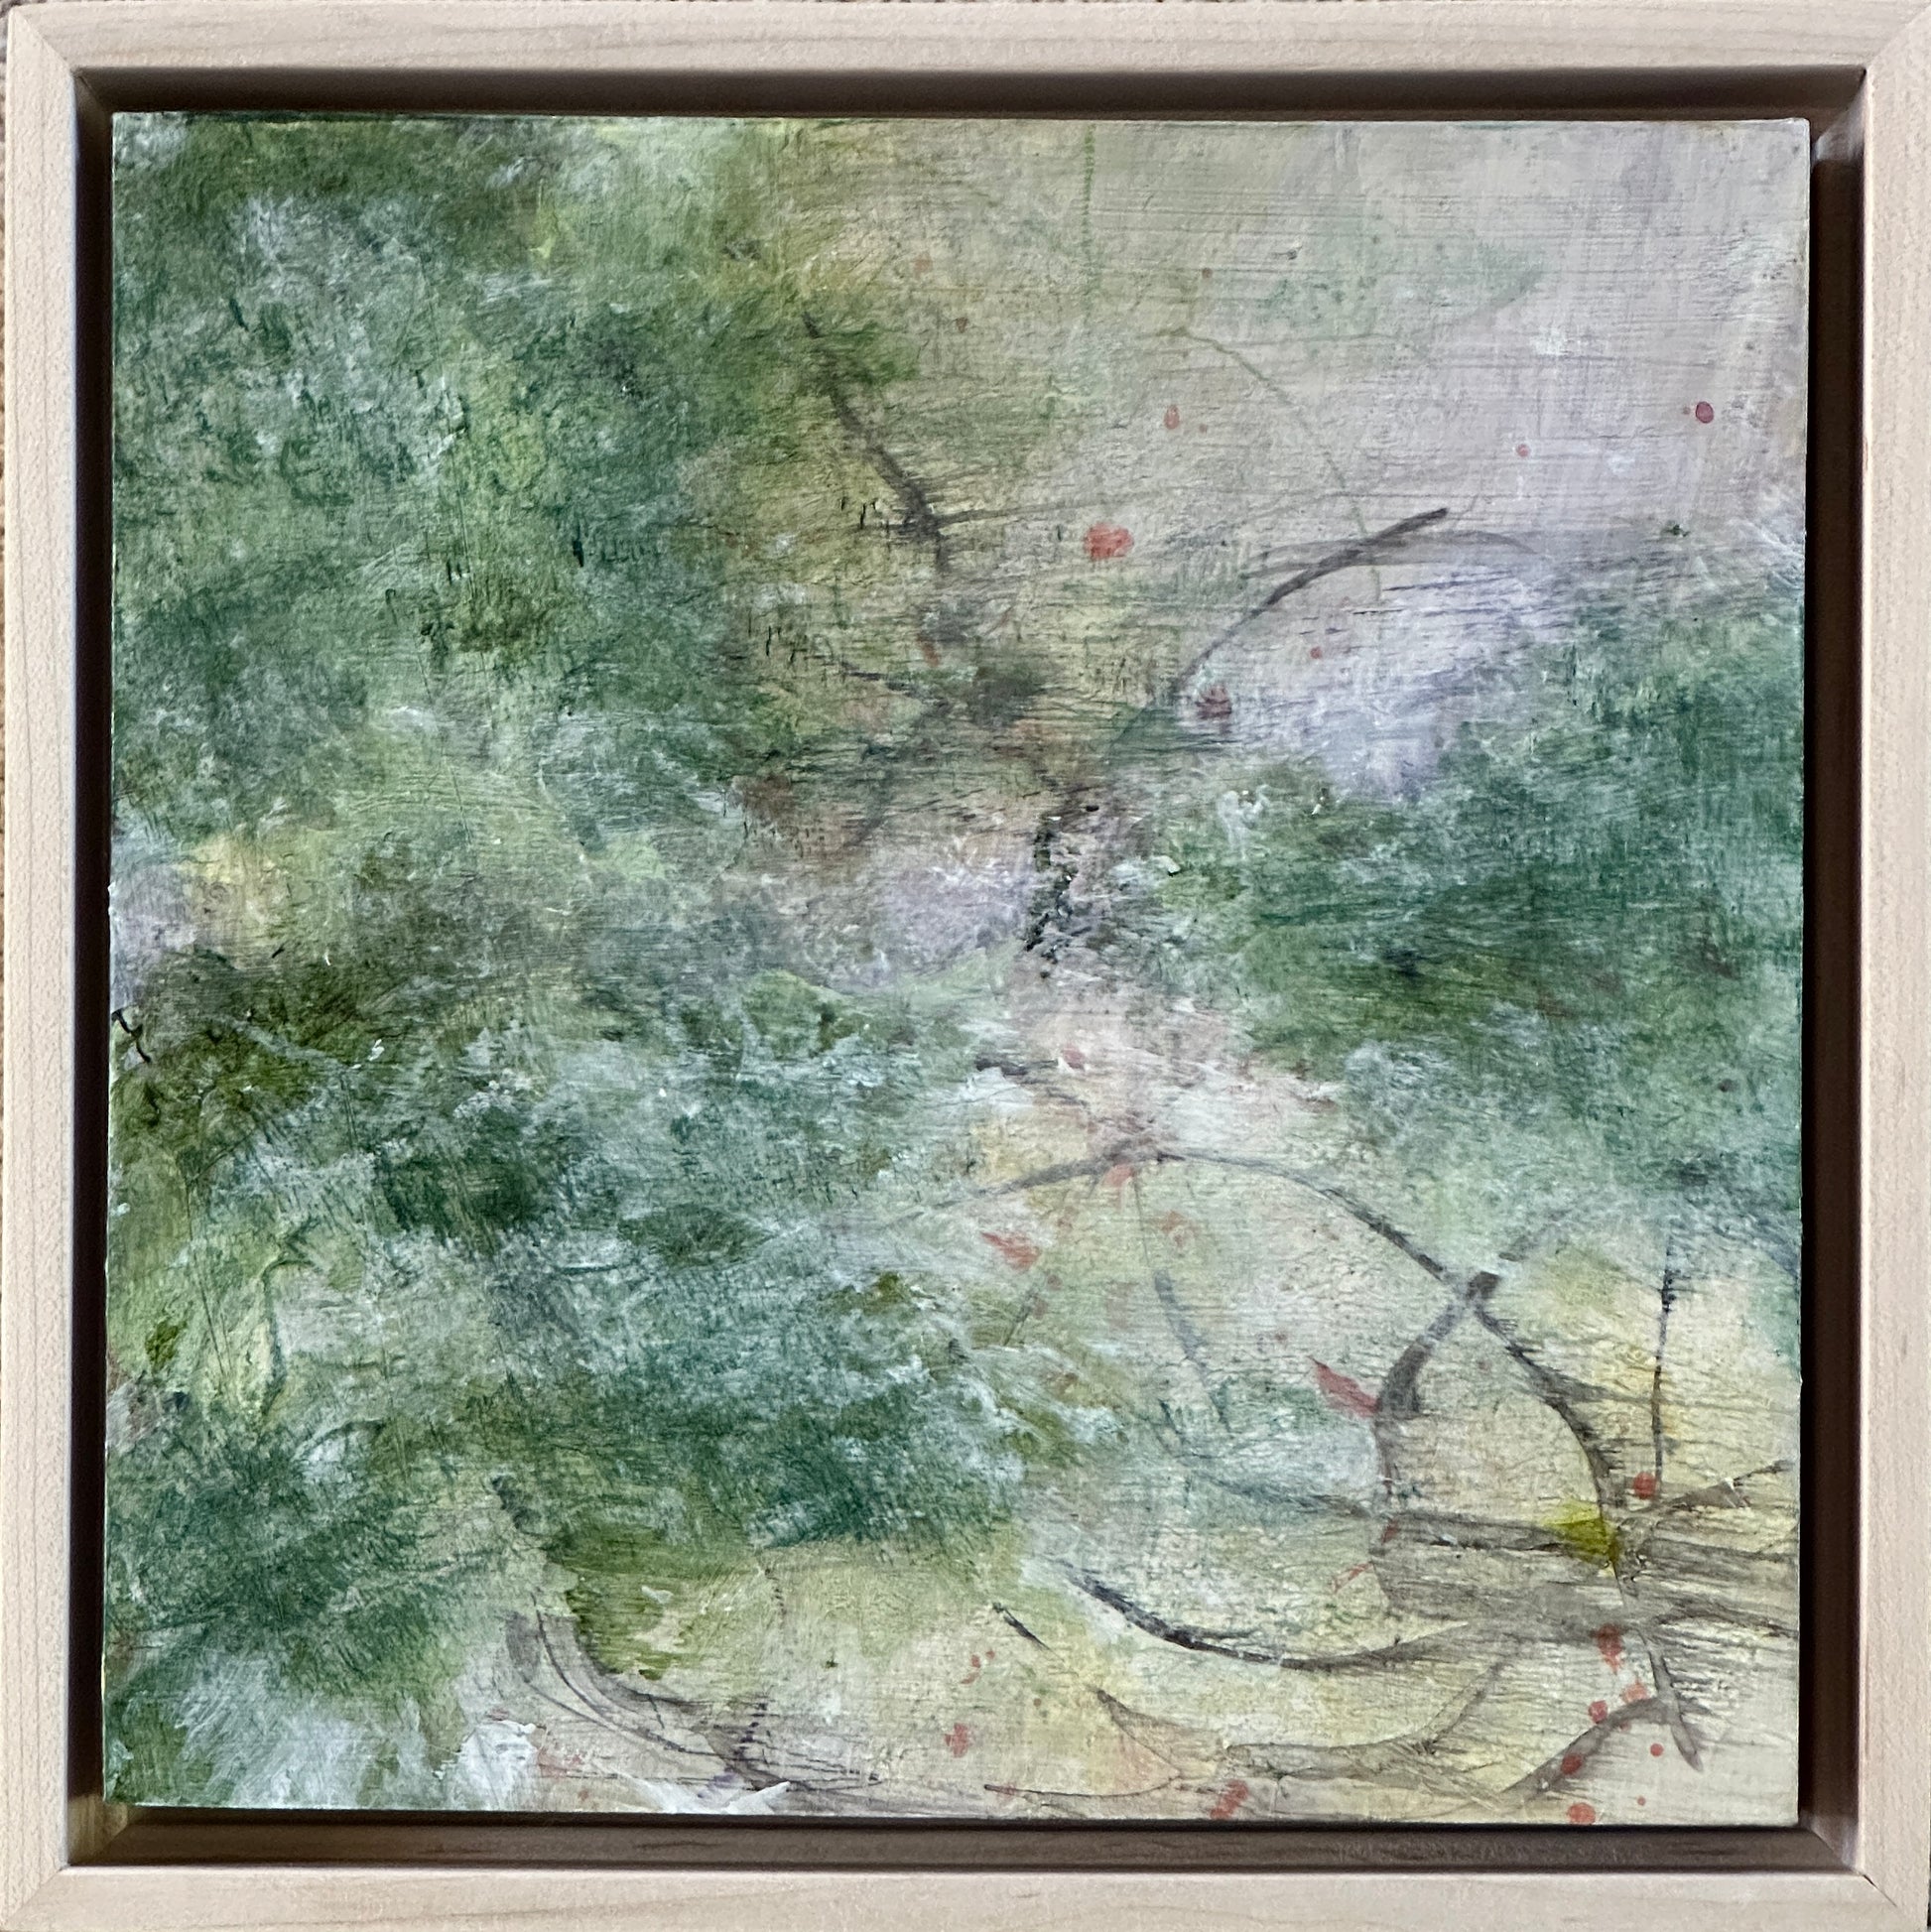 8 x 8 x 1.5-inch, framed, impression of a river after a rain where the sandy banks are now dry.  Acrylic painting on cradled panel with natural wood frame.  By Cumming, GA artist, Juanita Bellavance. Part of our 25 Days of Minis 2022 collection.  Collect them all!